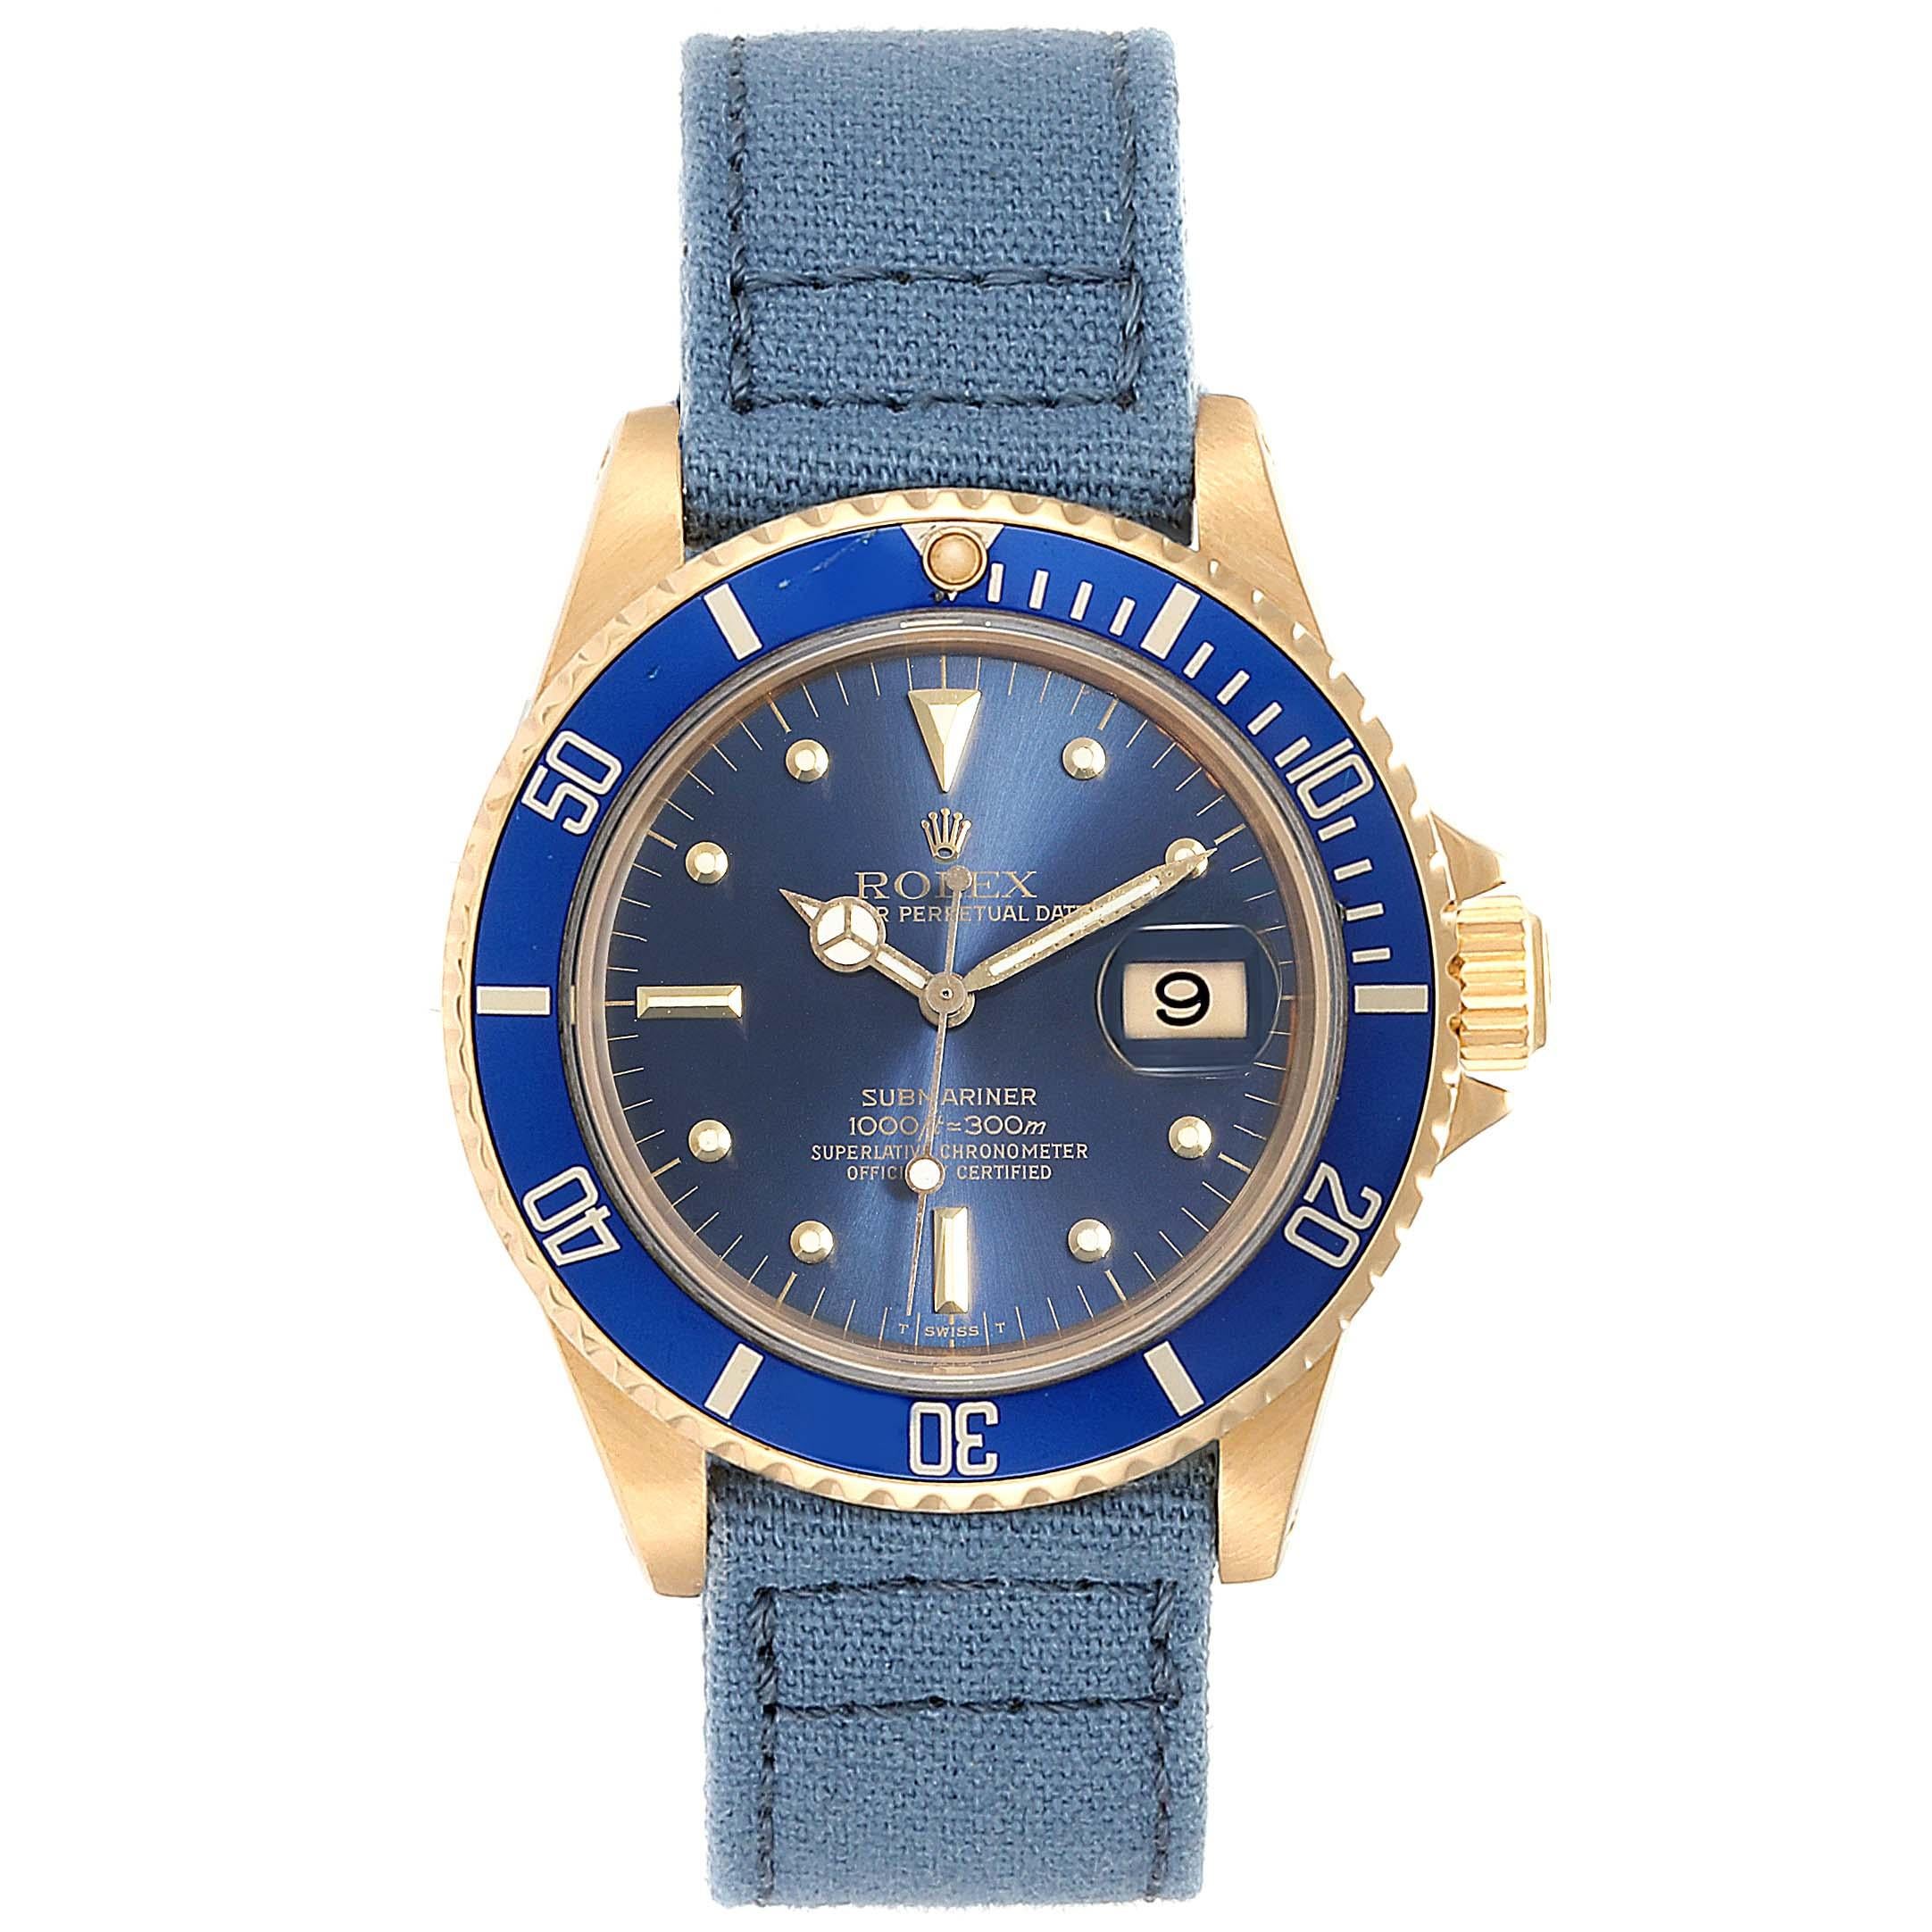 Rolex Submariner 18K Yellow Gold Blue Dial Mens Watch 16808. Officially certified chronometer self-winding movement. 18K yellow gold case 40.0 mm in diameter. Rolex logo on a crown. Original 18k yellow gold bidirectional rotating bezel with a